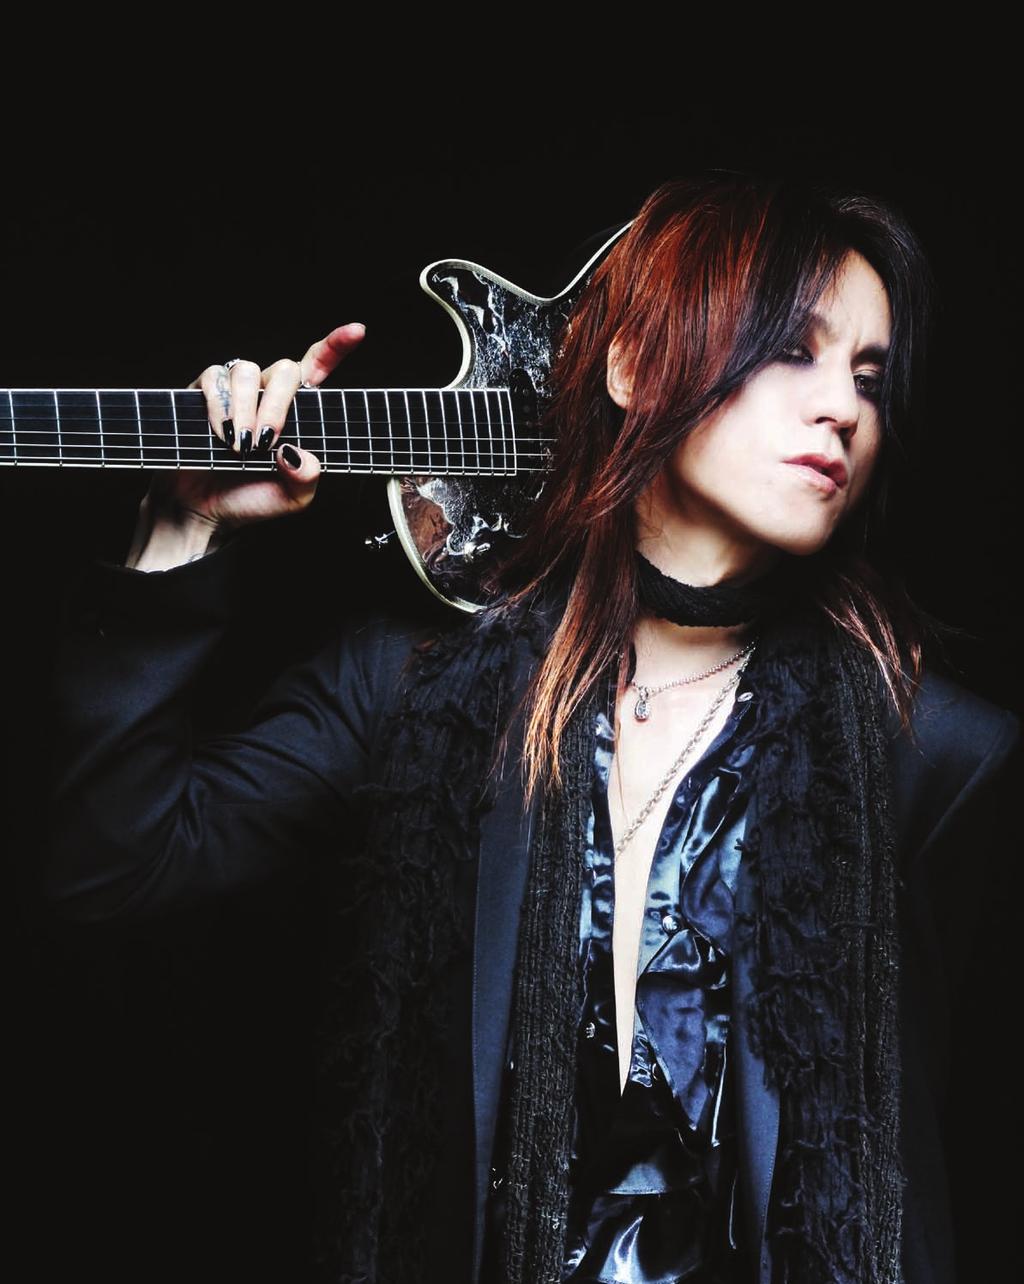 A J!-ENT SPECIAL FEATURE ARTICLE AND INTERVIEW SUGIZO J!